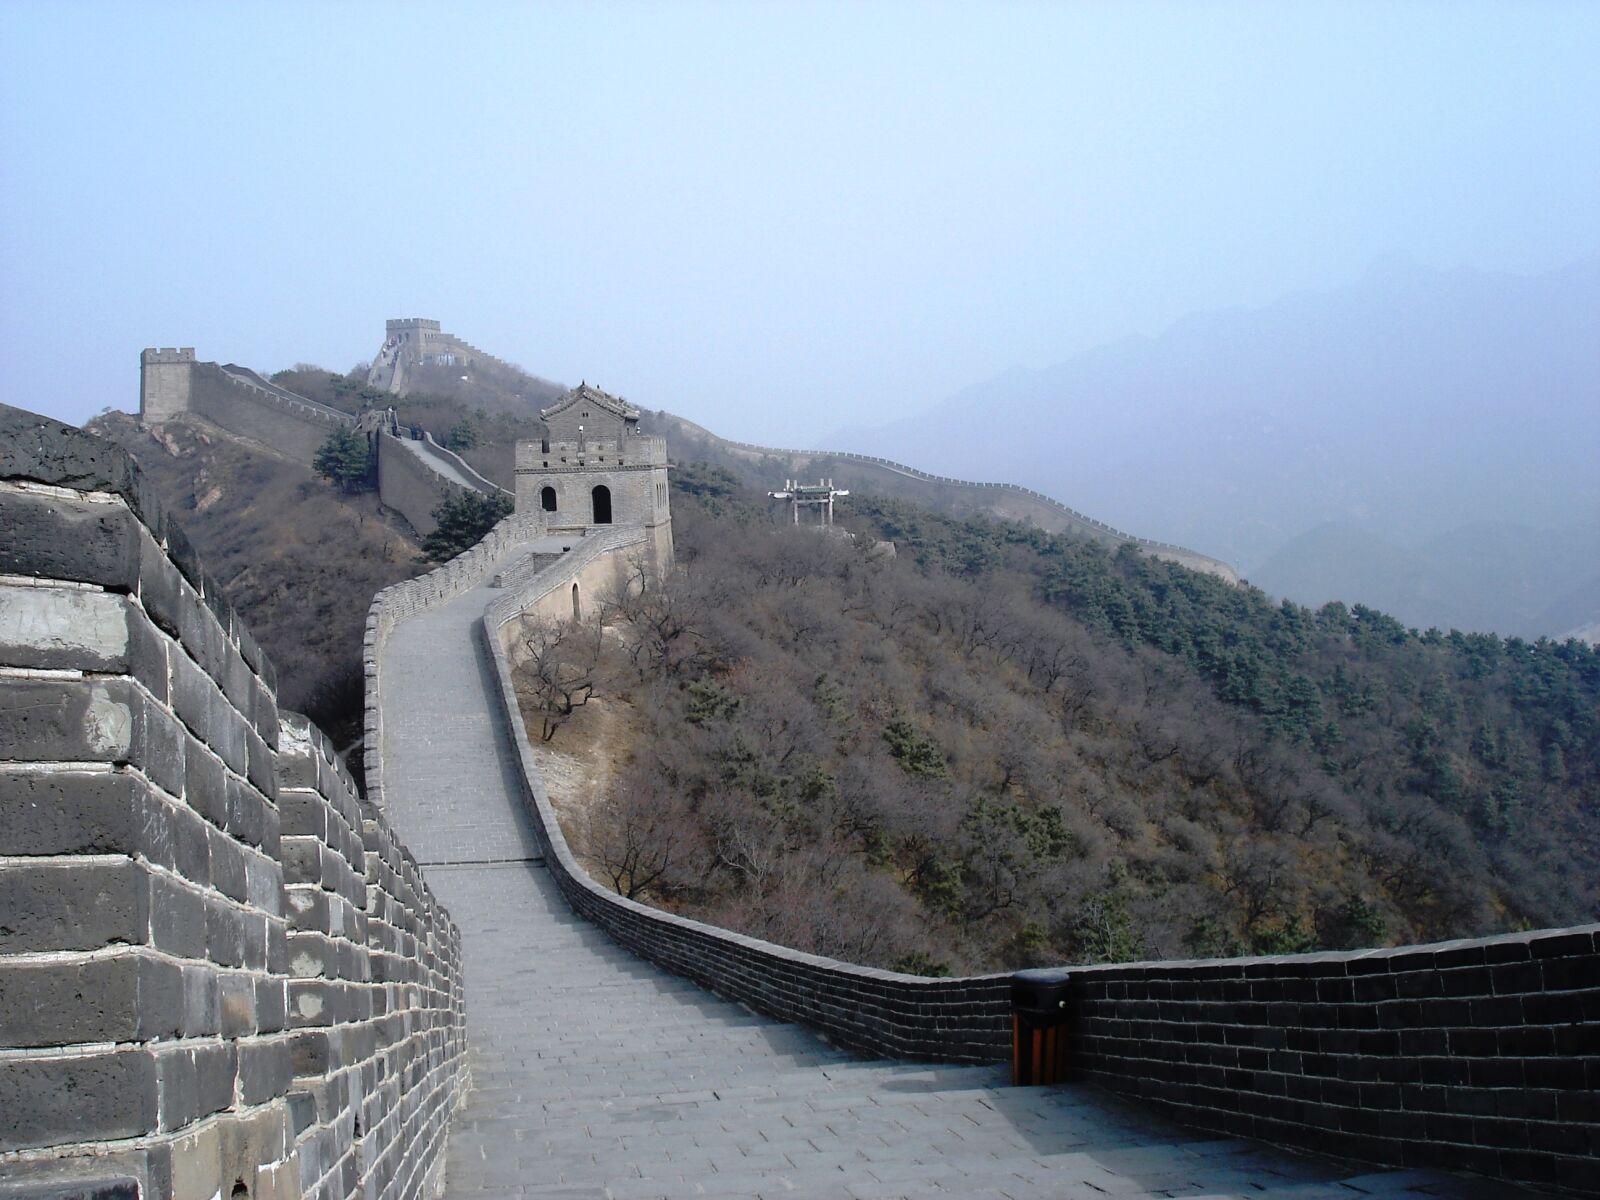 Sony DSC-W5 sample photo. "Great wall of china" photography